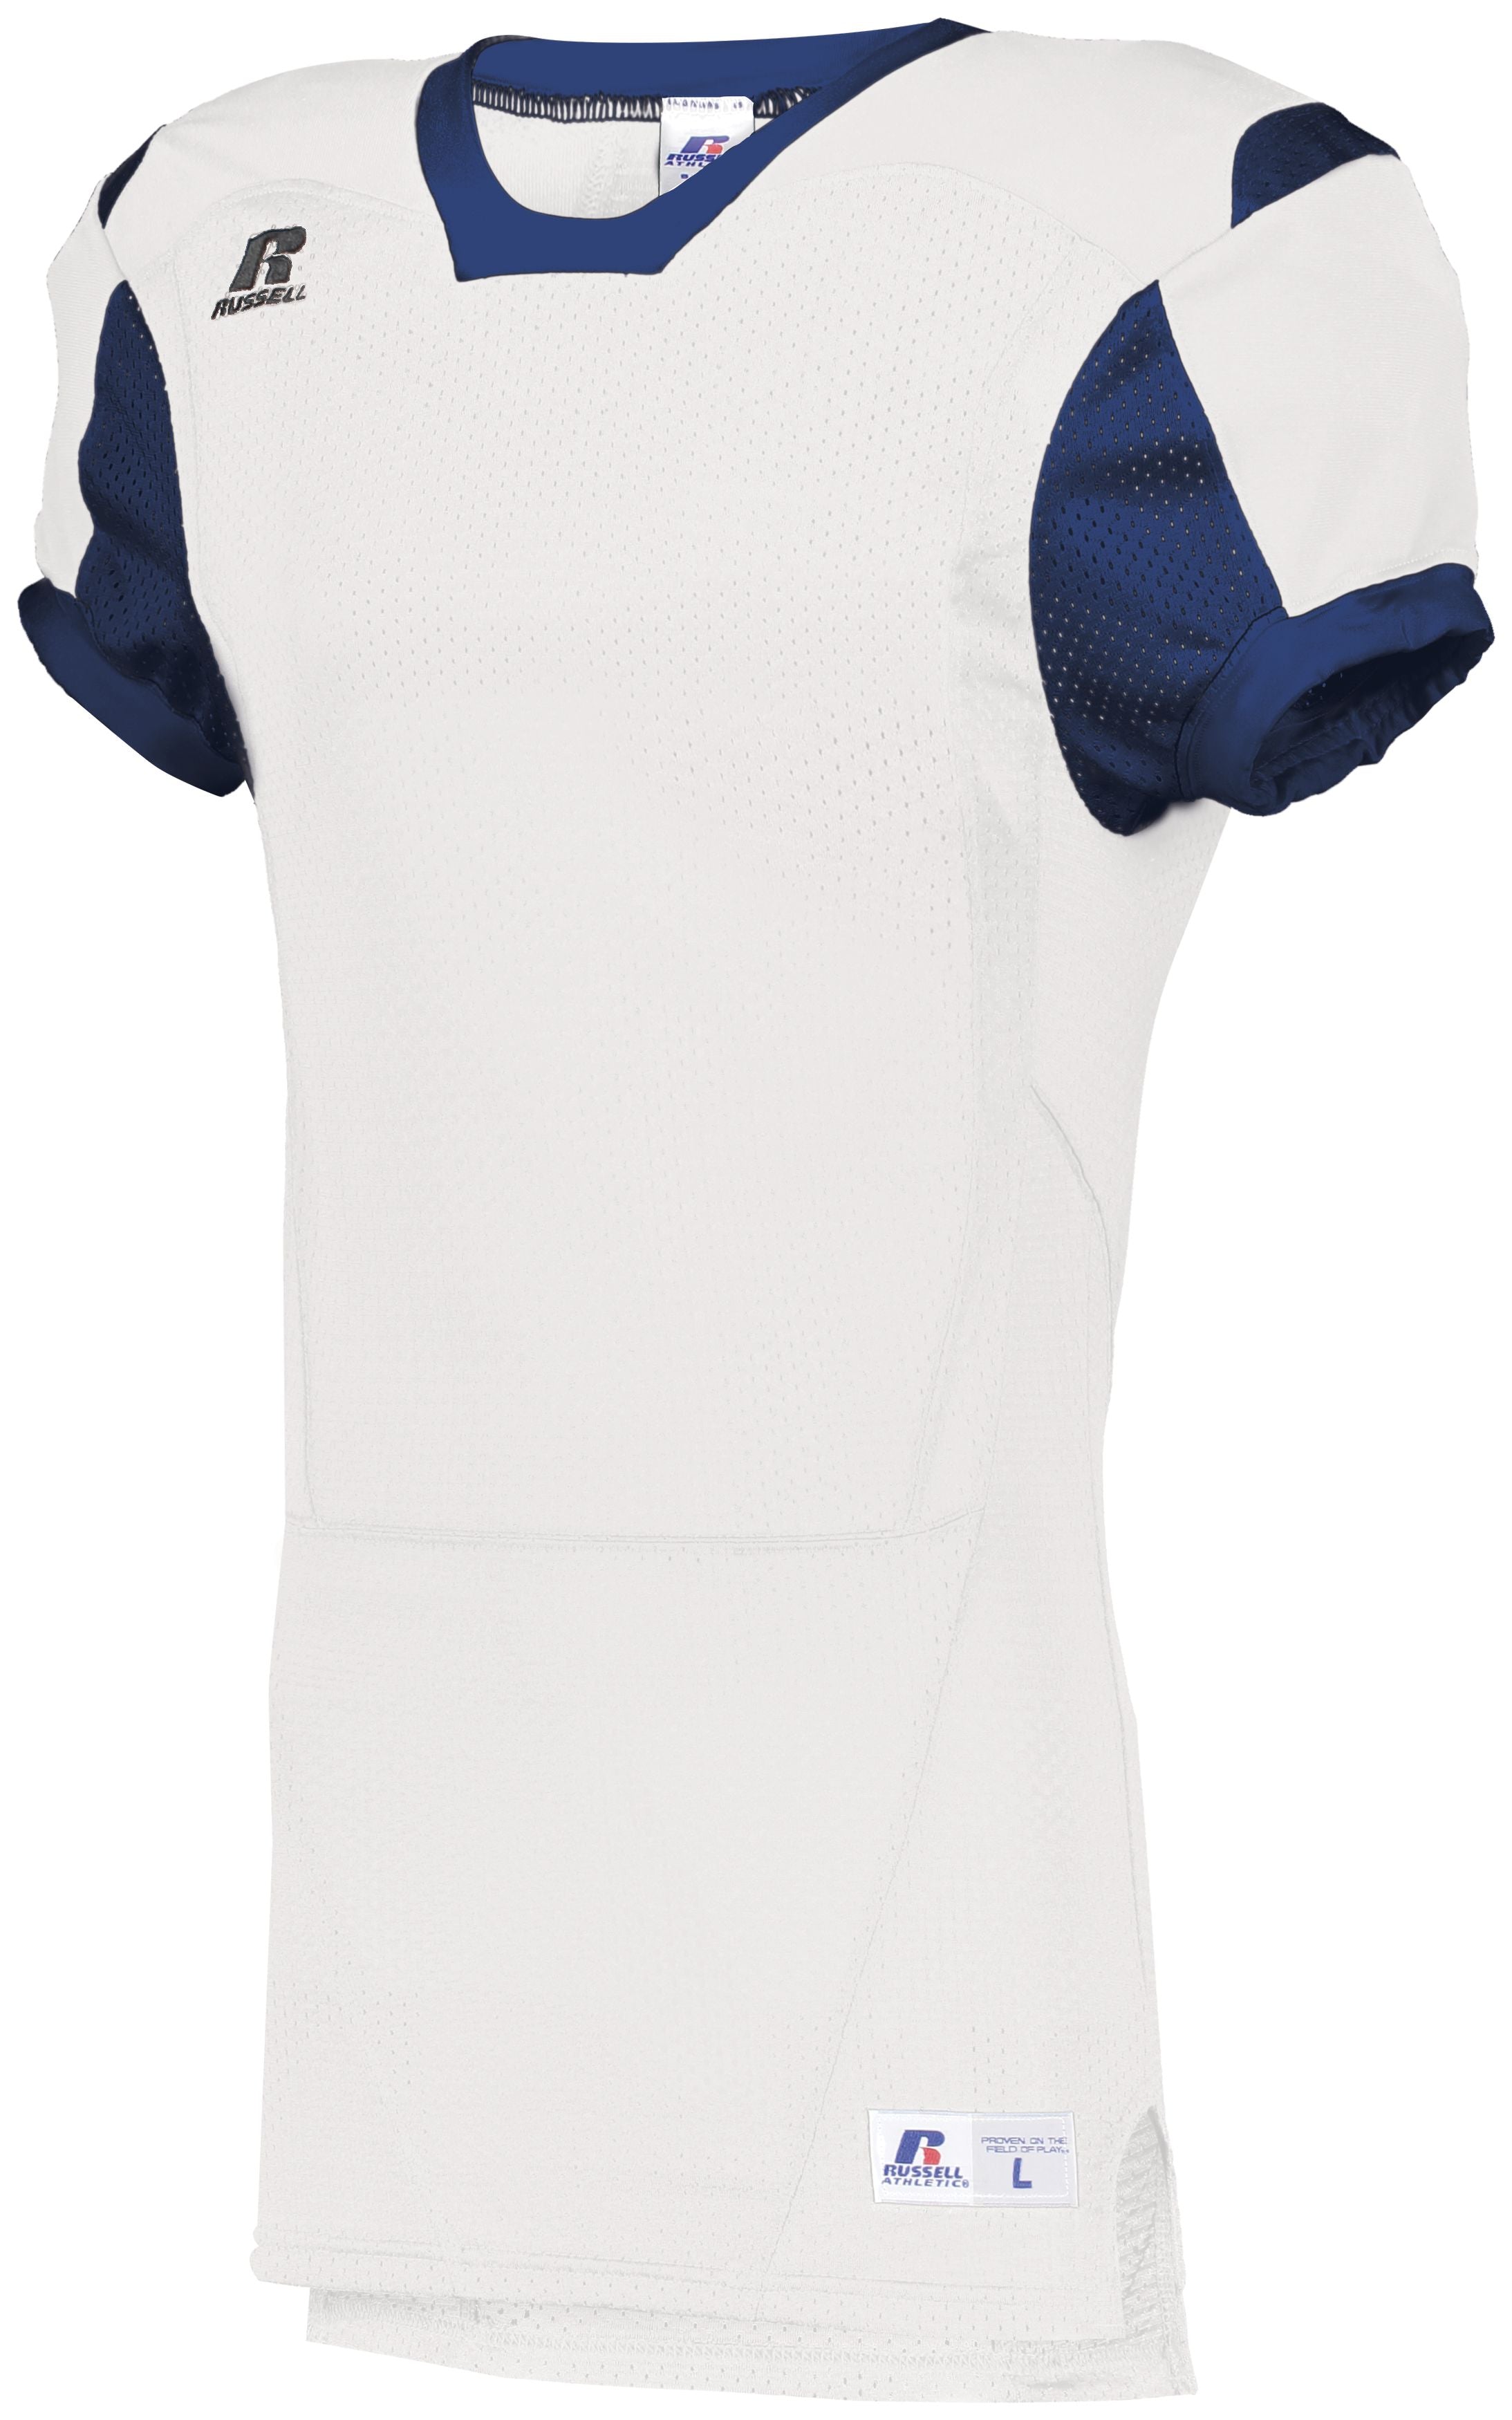 Russell Athletic Youth Color Block Game Jersey in White/Navy  -Part of the Youth, Youth-Jersey, Football, Russell-Athletic-Products, Shirts, All-Sports, All-Sports-1 product lines at KanaleyCreations.com